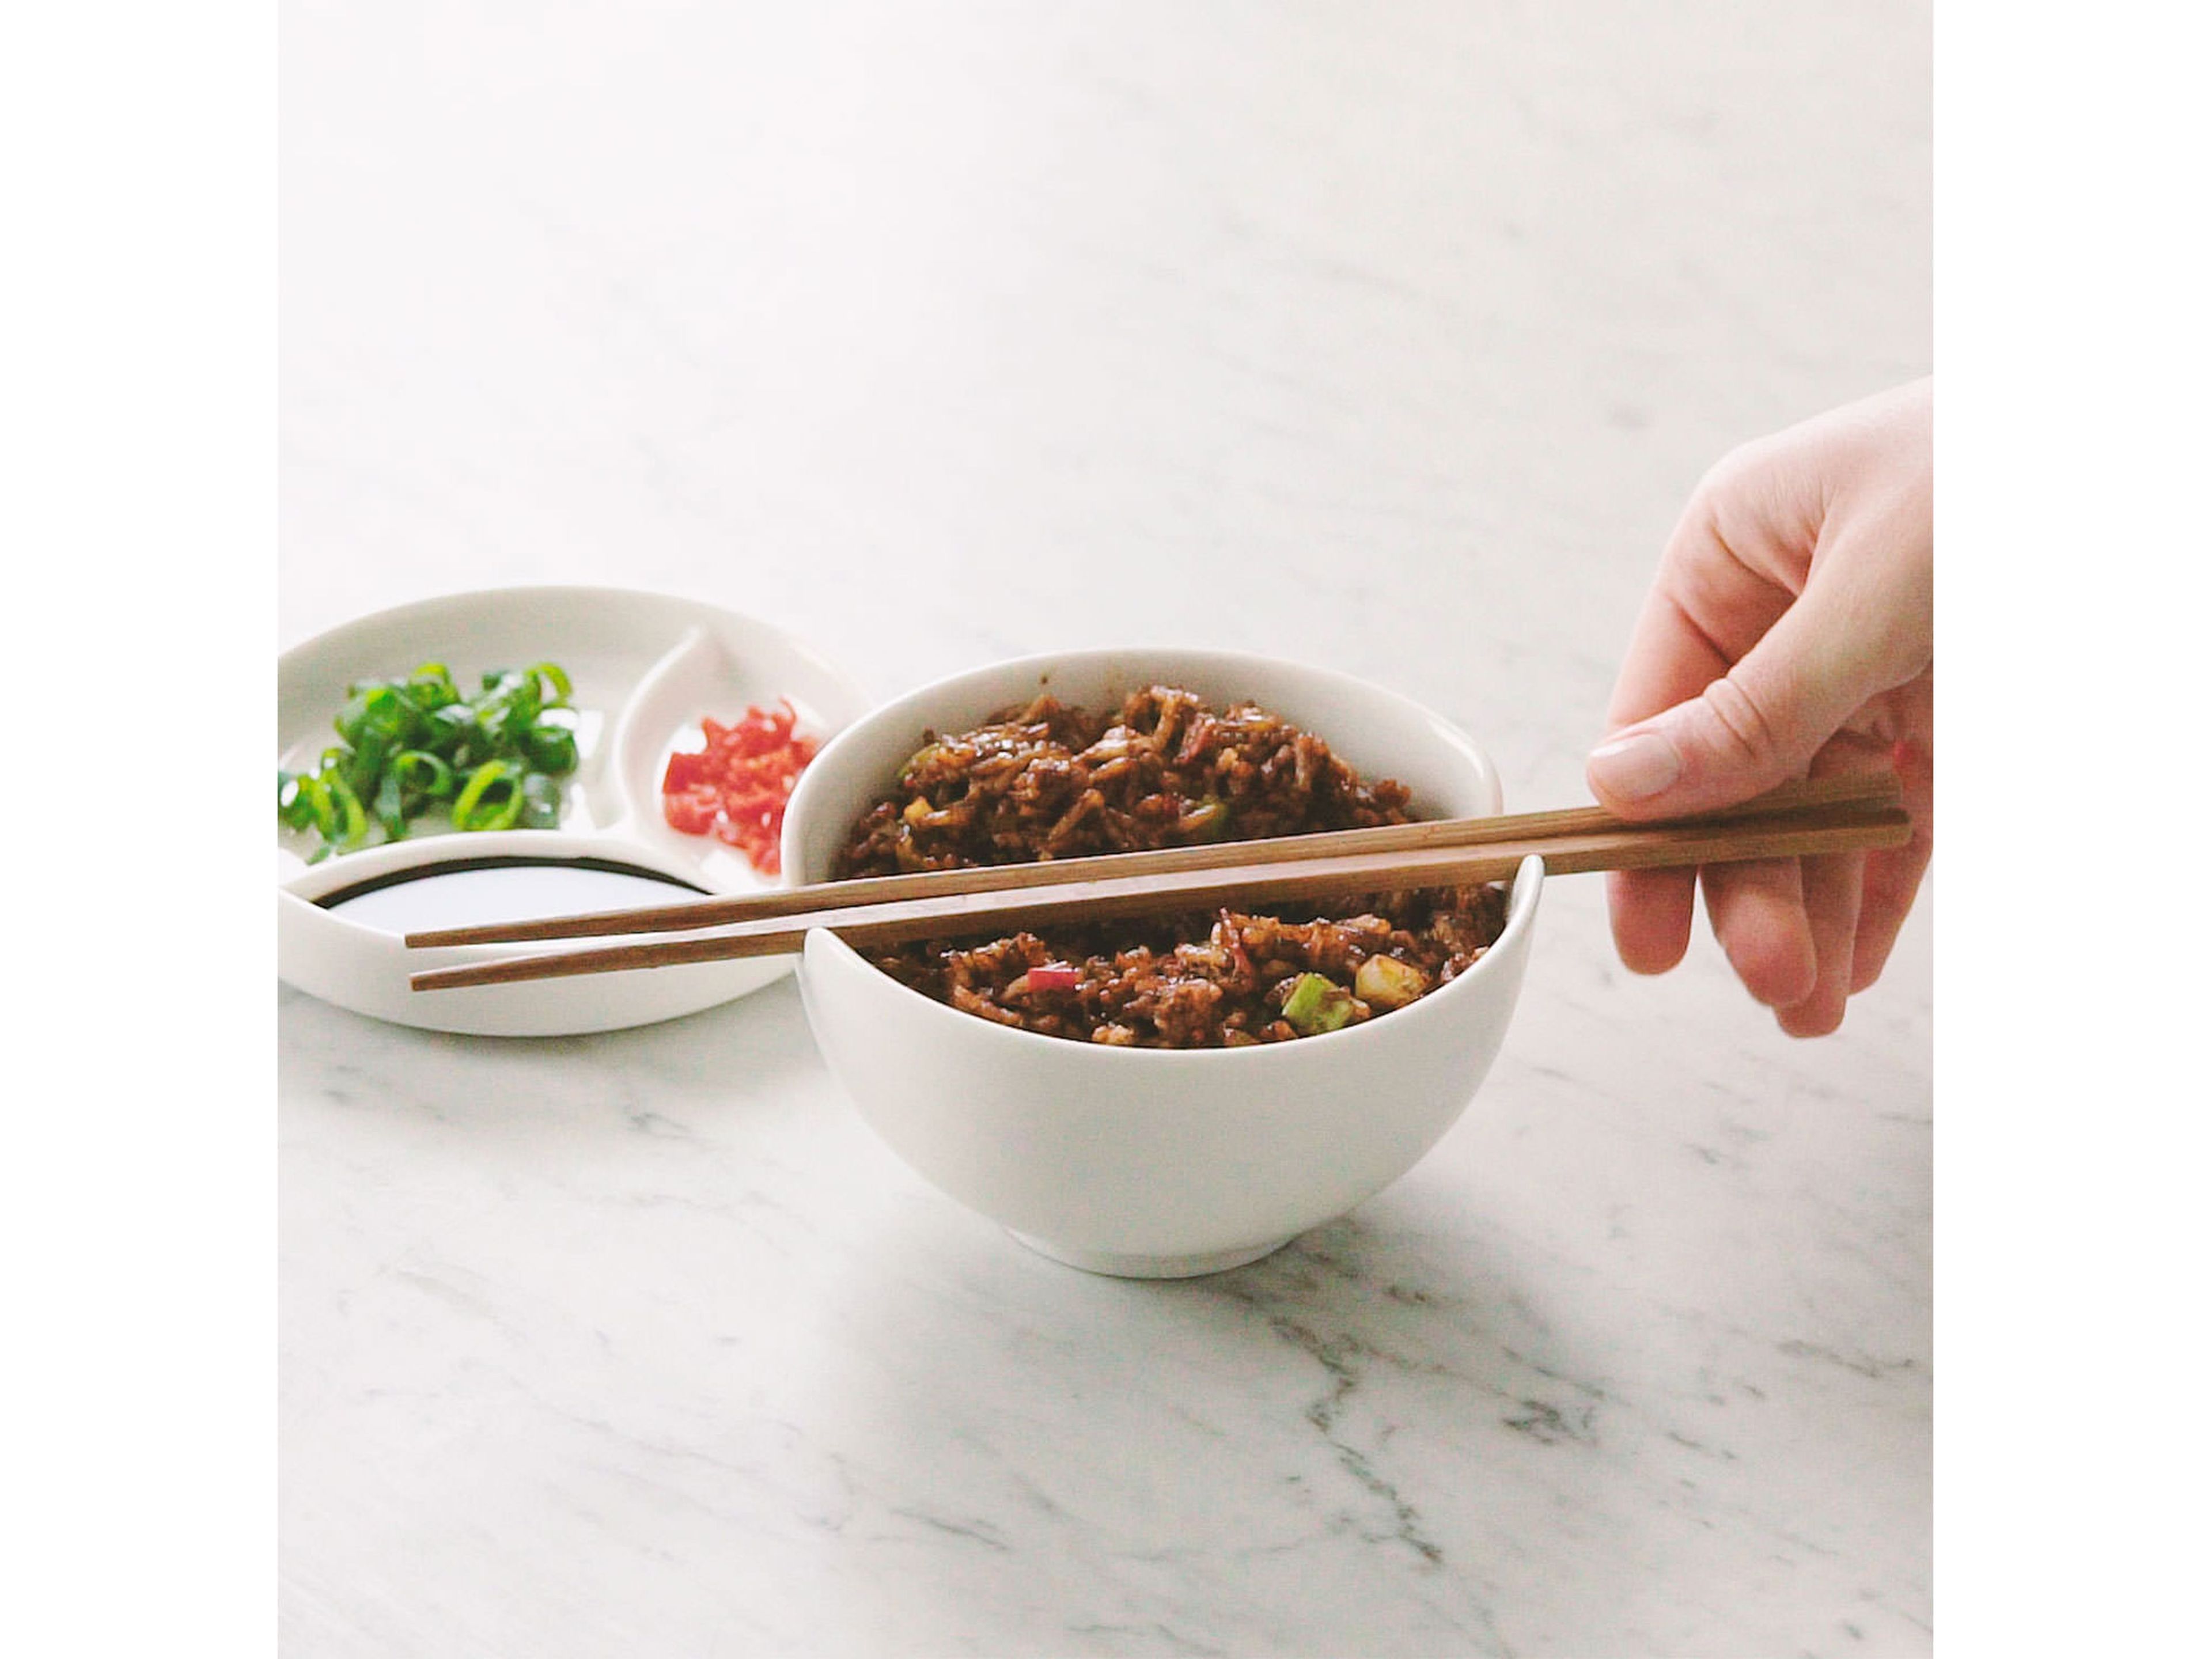 Transfer to a serving bowl and garnish with reserved scallion greens, fresh chili and soy sauce to taste. Enjoy!